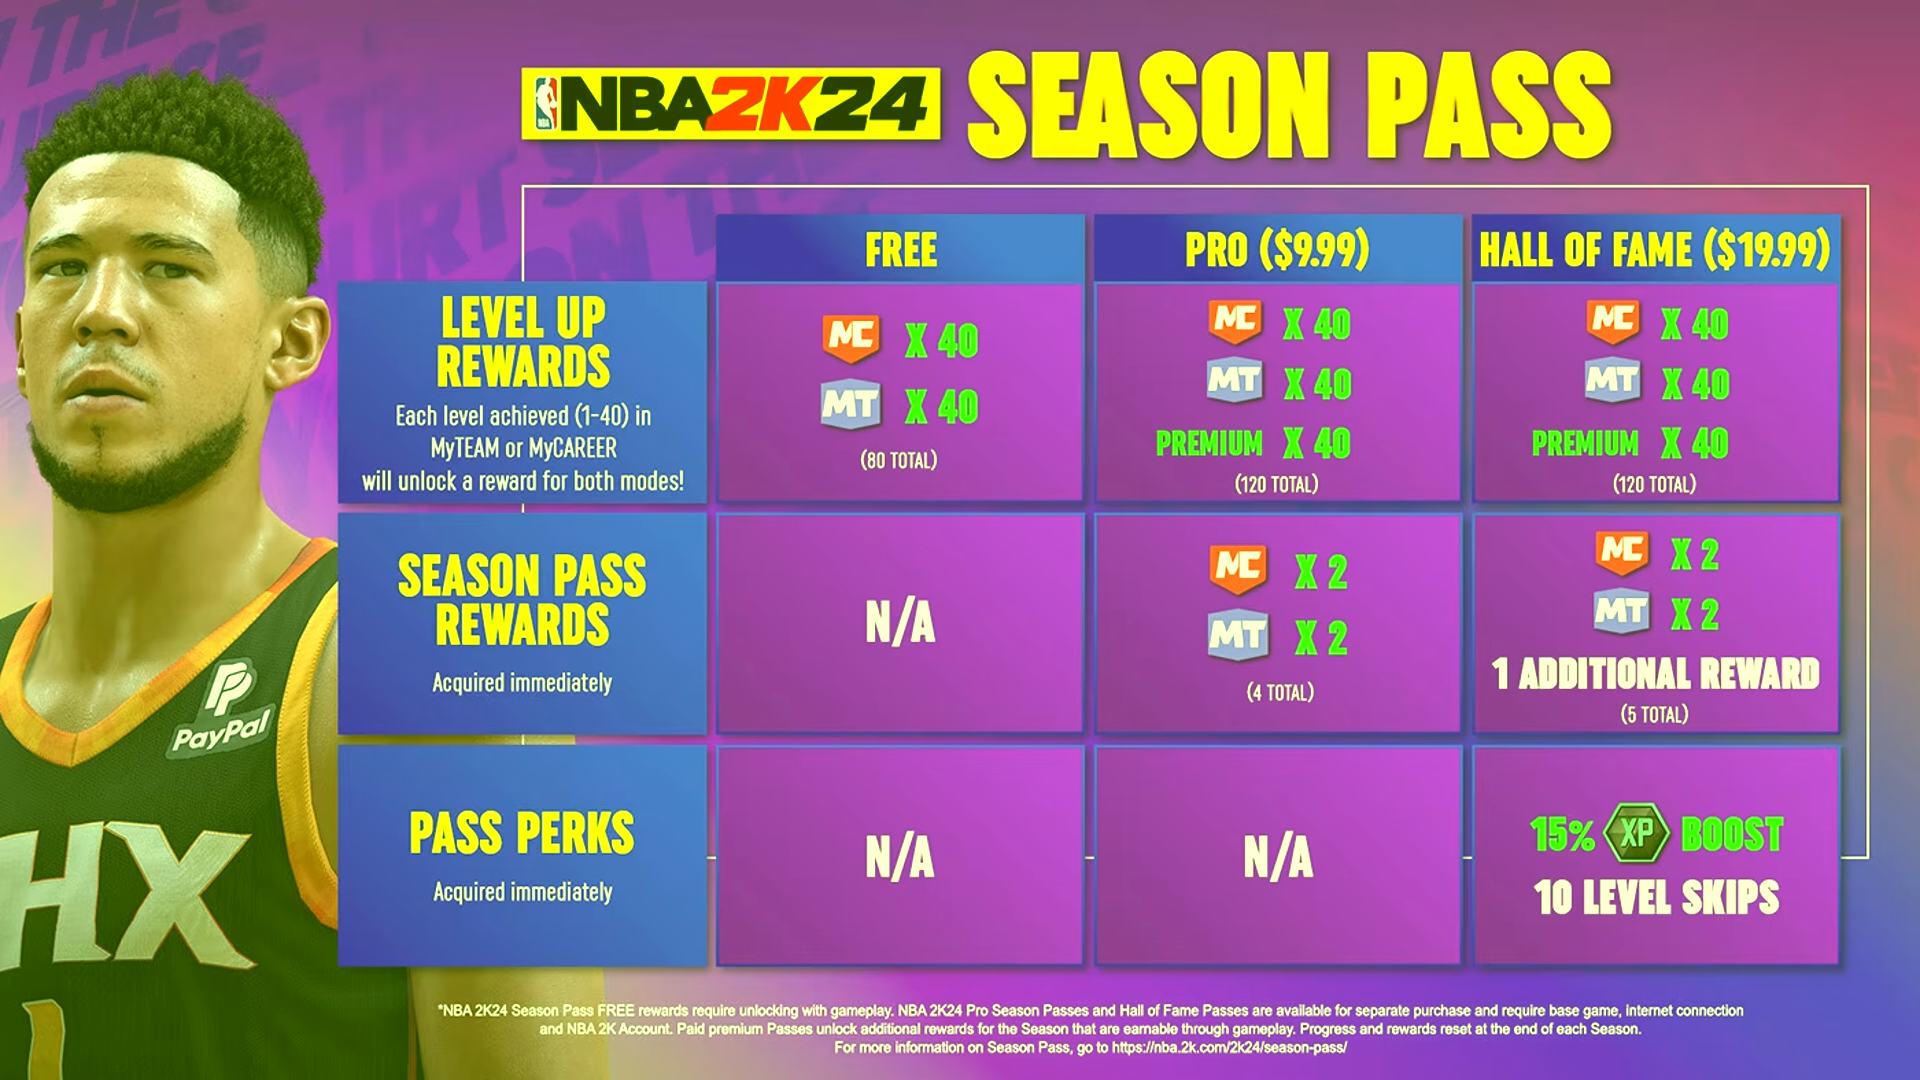 NBA 2K24 release date, cover star, new features, and more details The